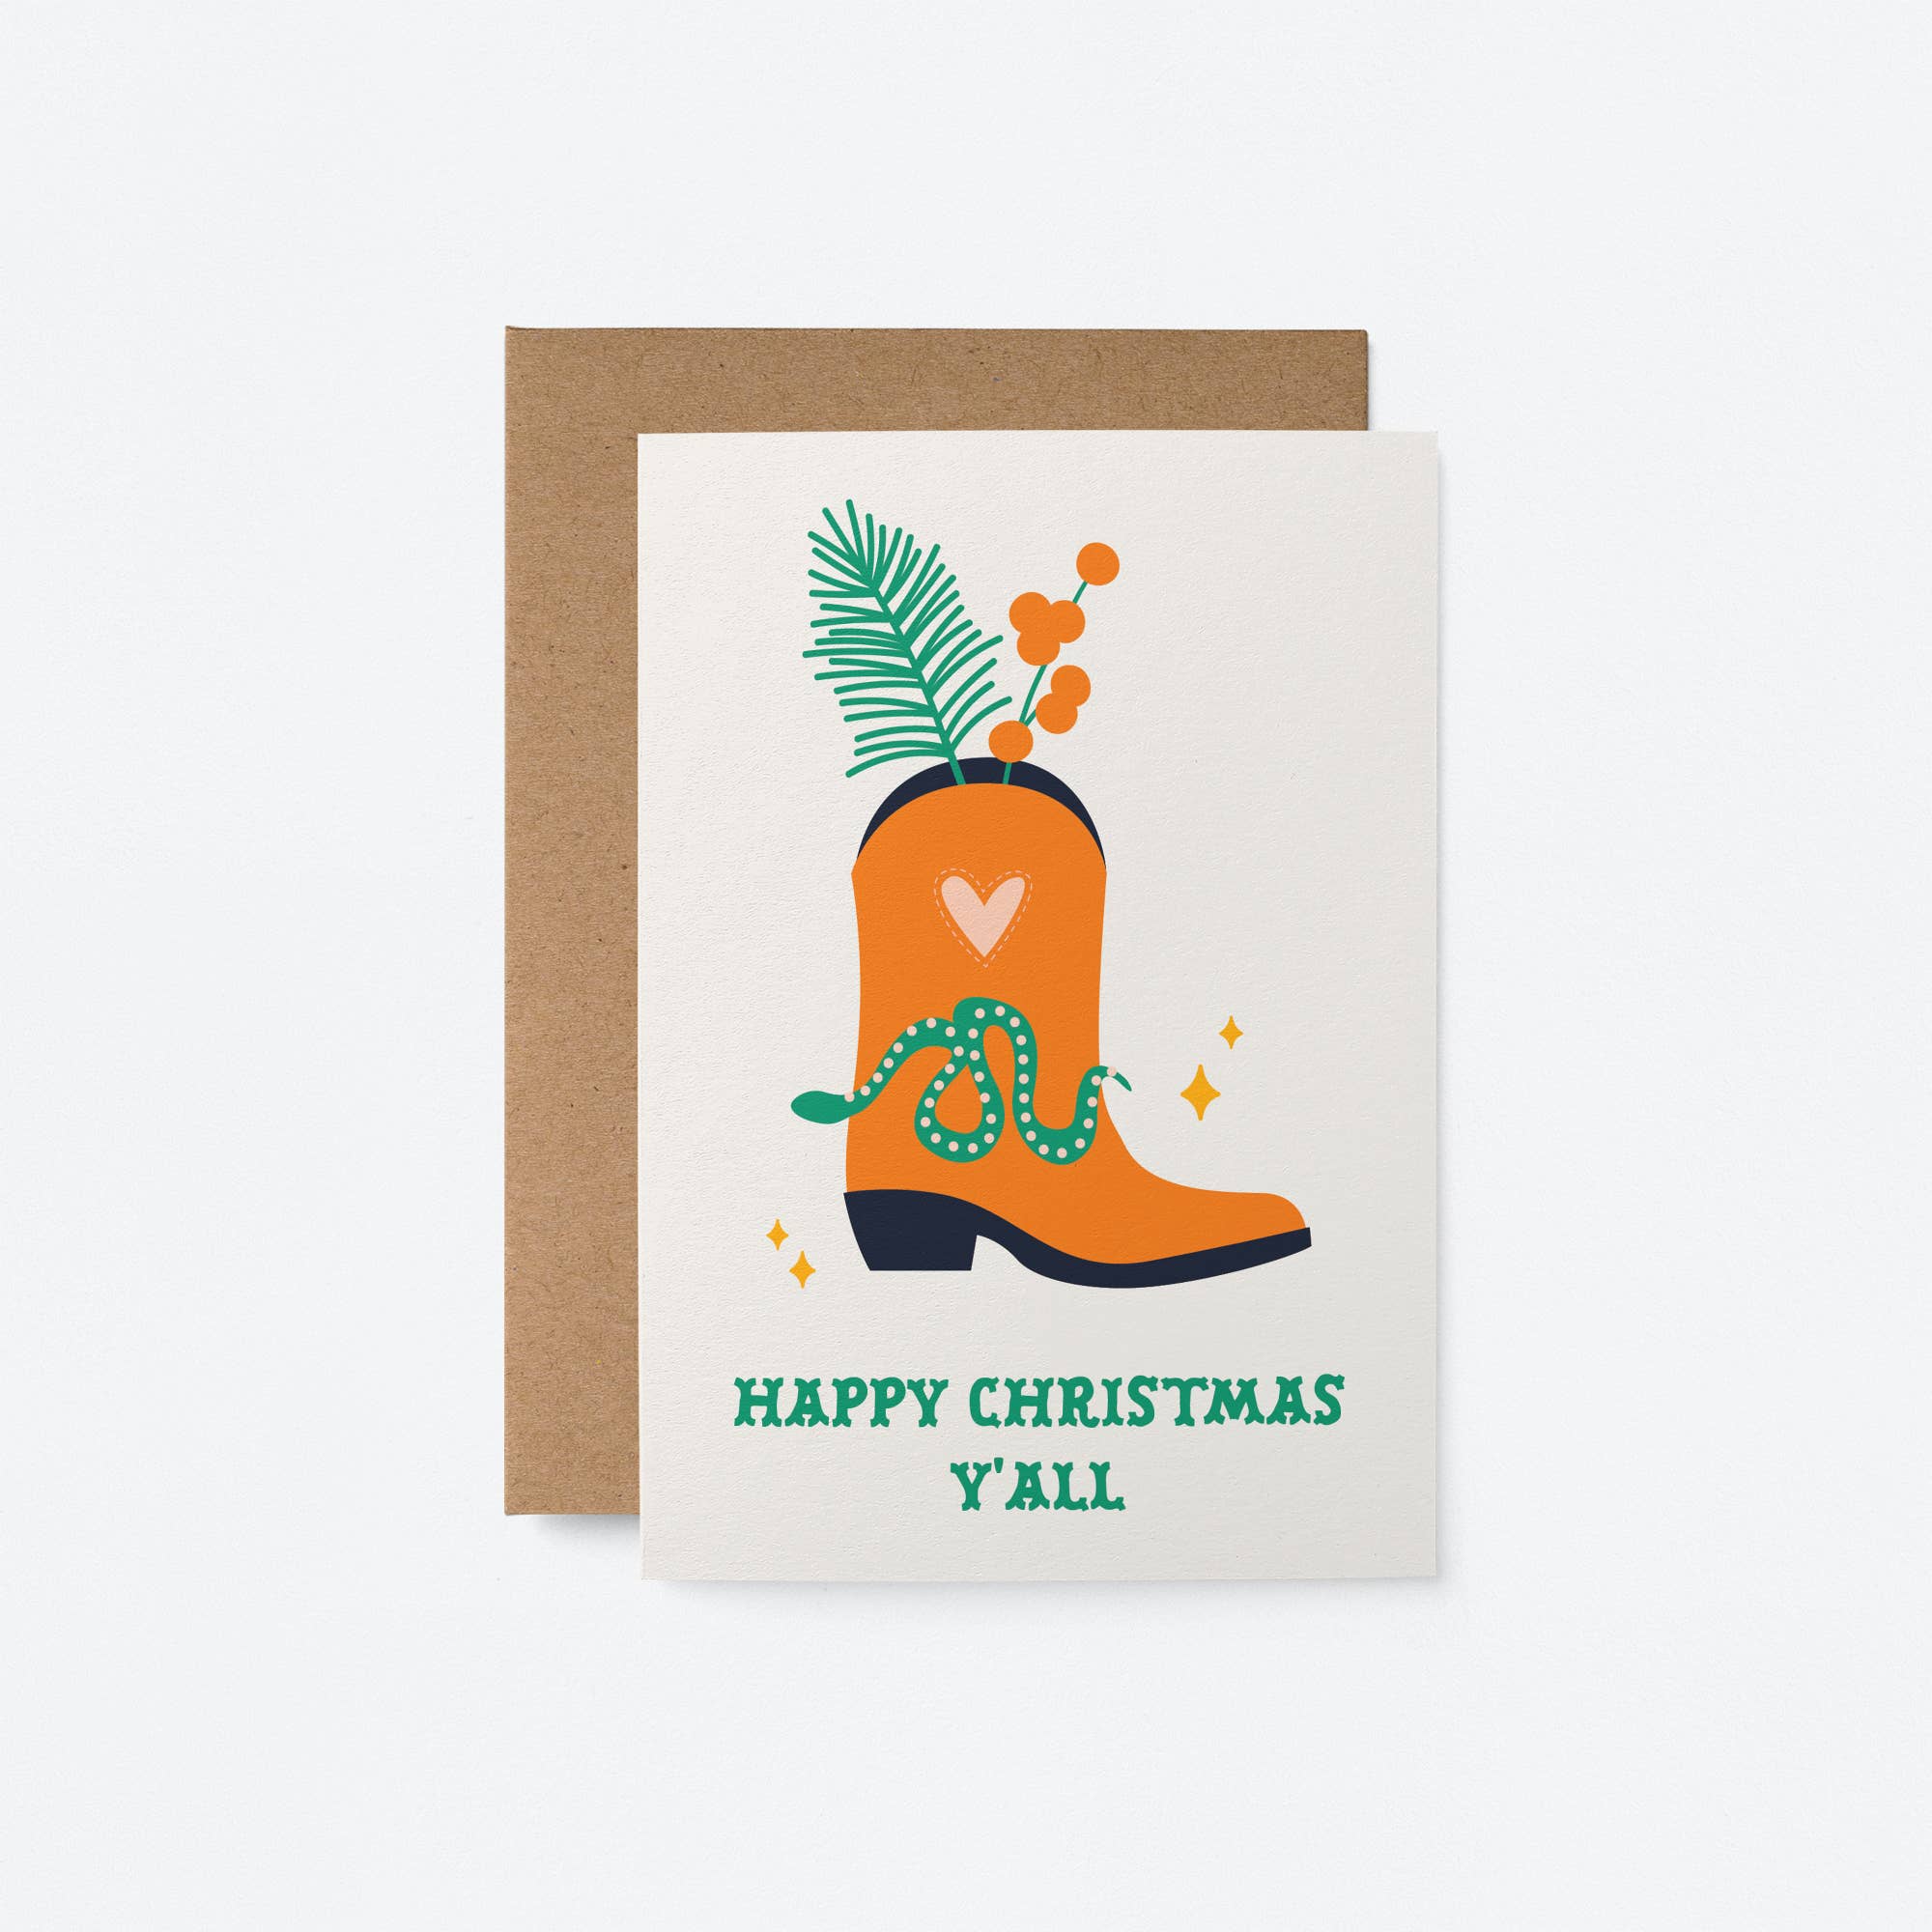 Merry Christmas Y'all Letterpress Christmas Cards Printed on White